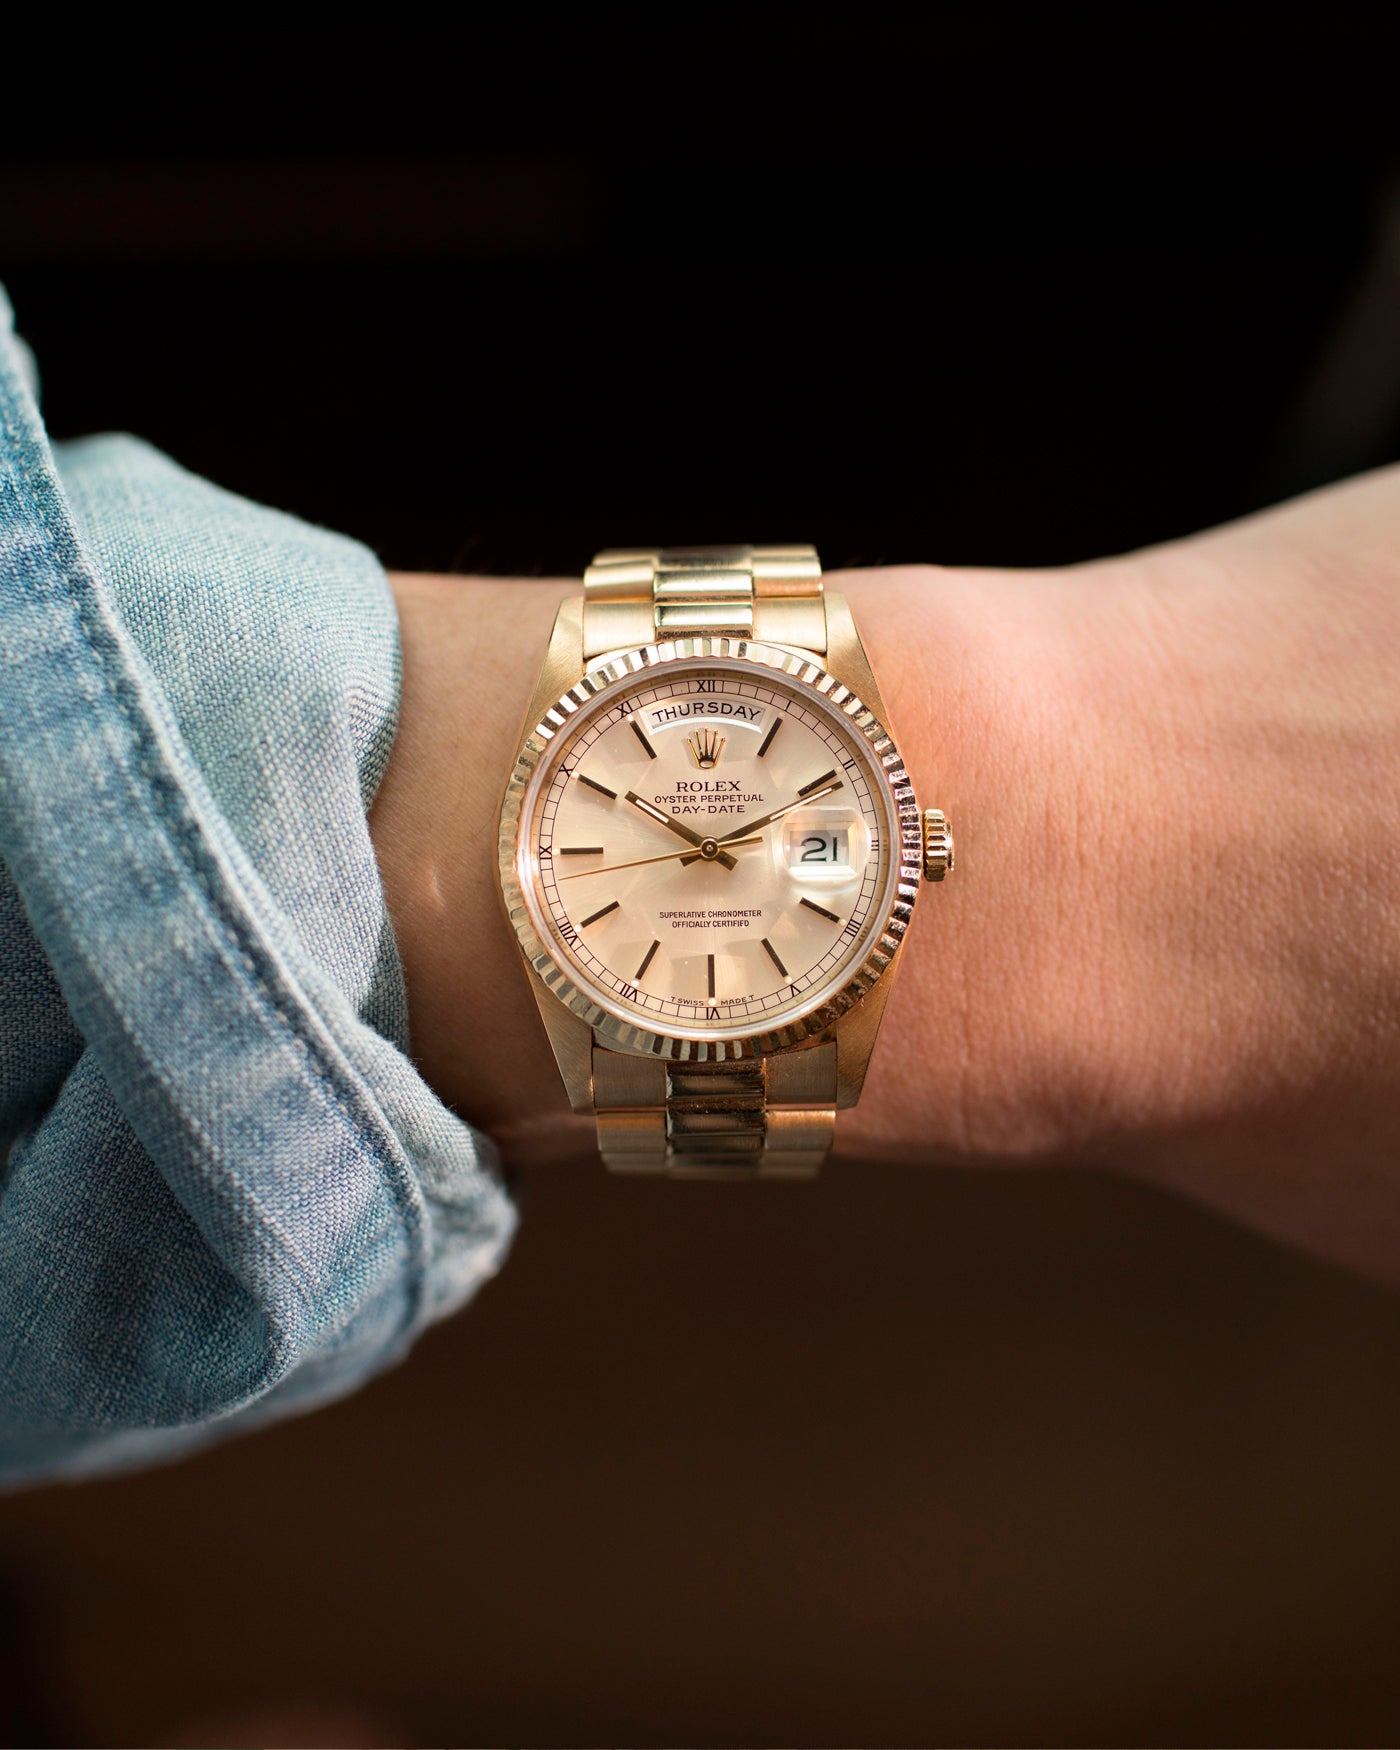 Rolex Day Date 18238 President Watch | S.Song Vintage Watches For Sale ...